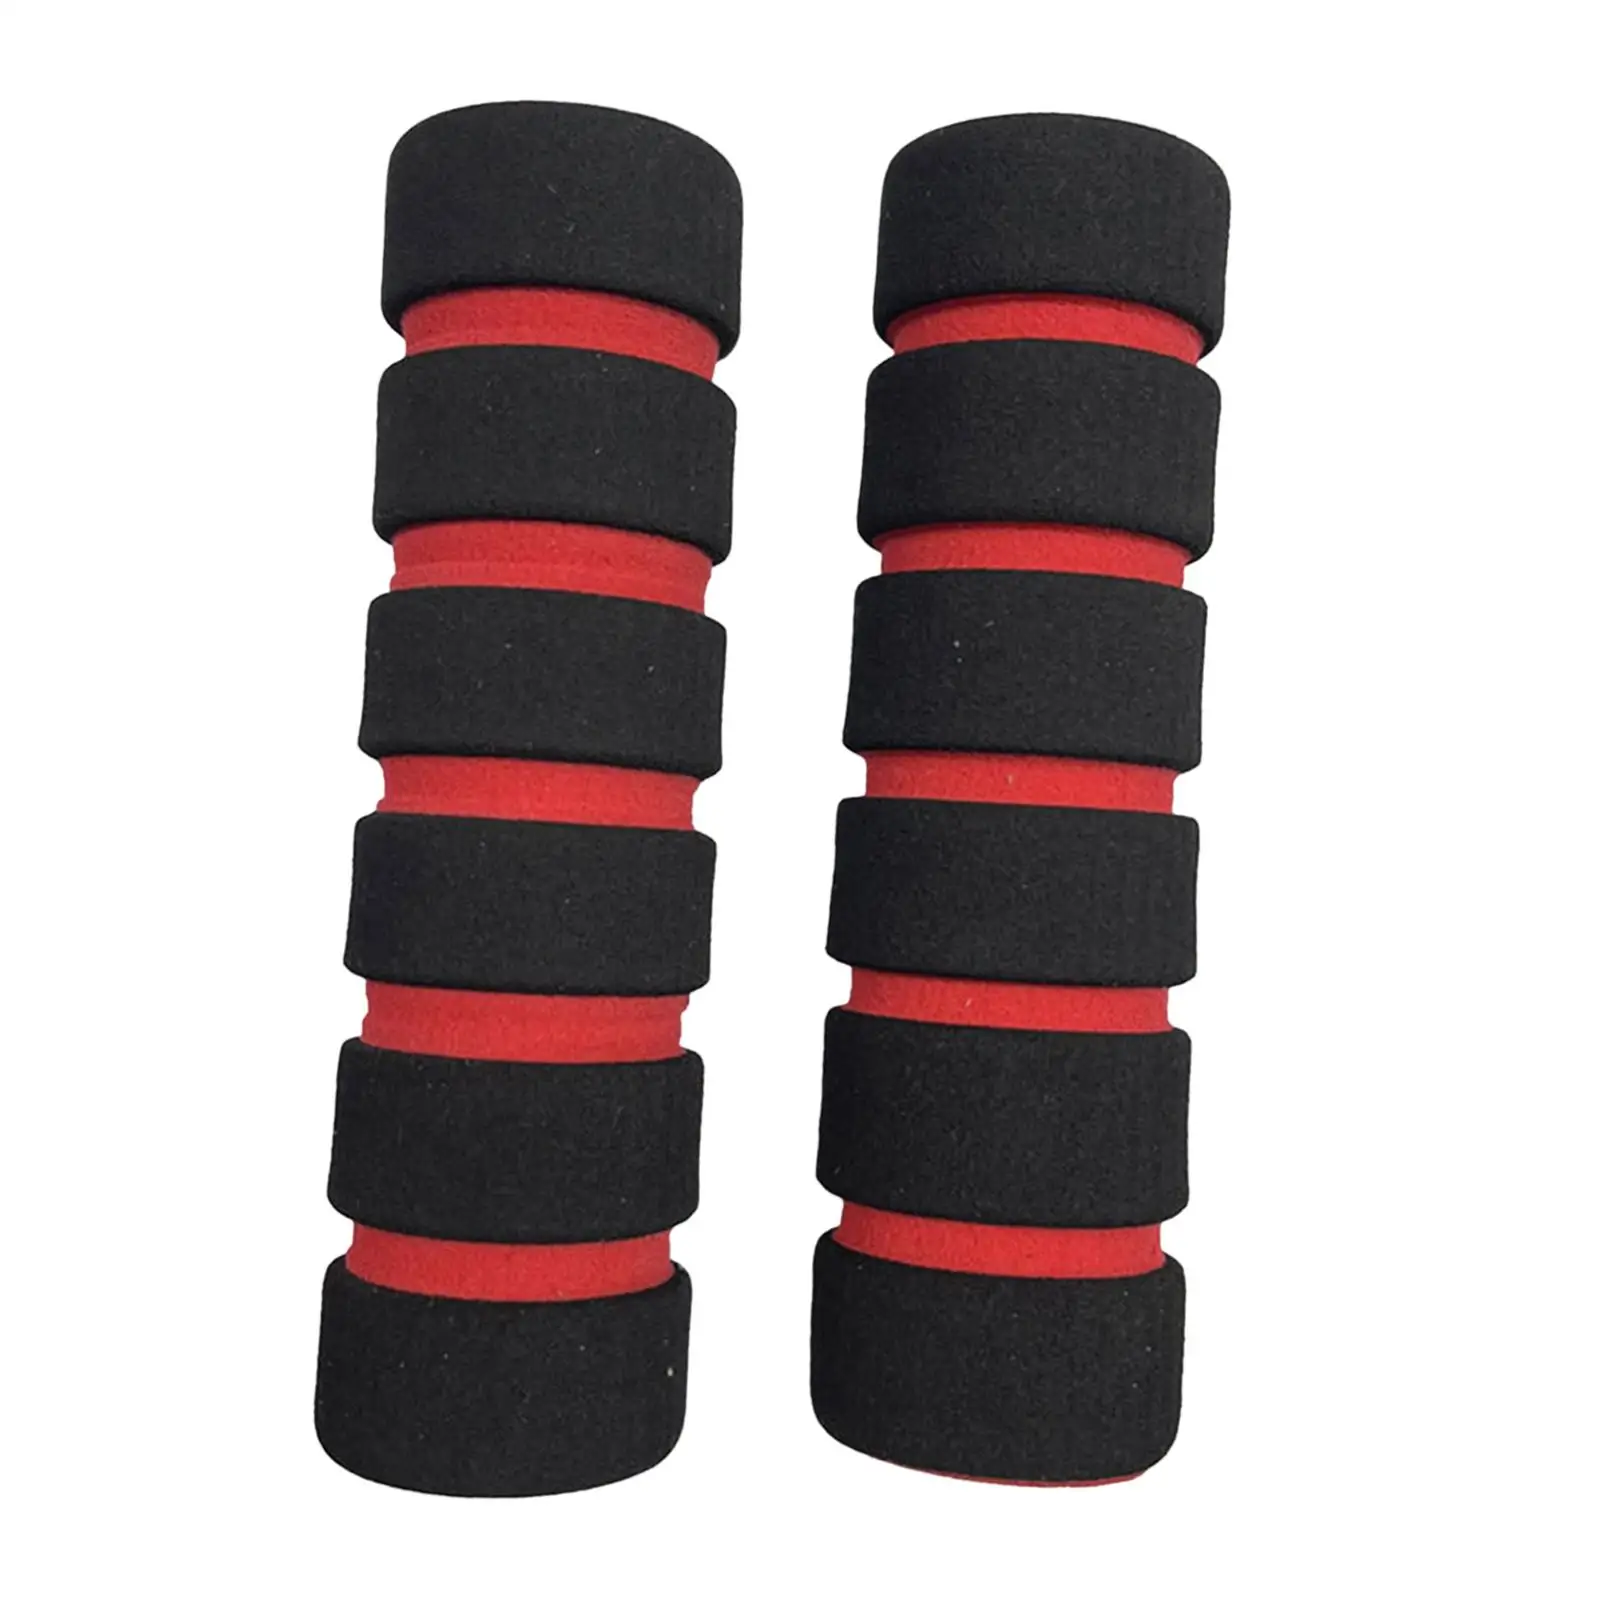 Sponge Sleeve Fitness Equipment for Fitness Equipments Weight Bench Abdominal Trainer Exercise Machines Strength Training